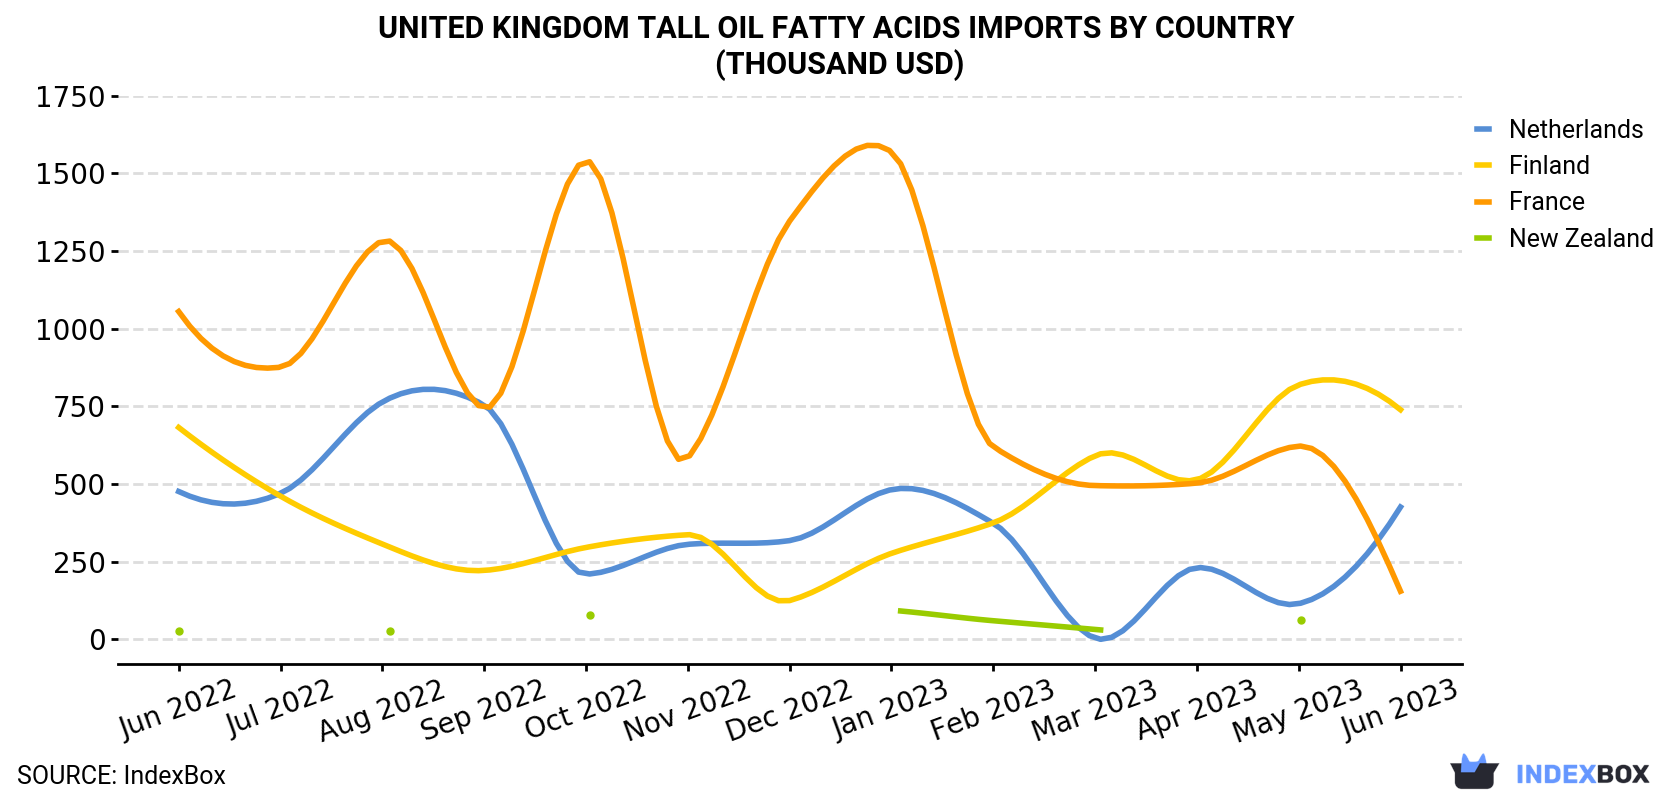 United Kingdom Tall Oil Fatty Acids Imports By Country (Thousand USD)